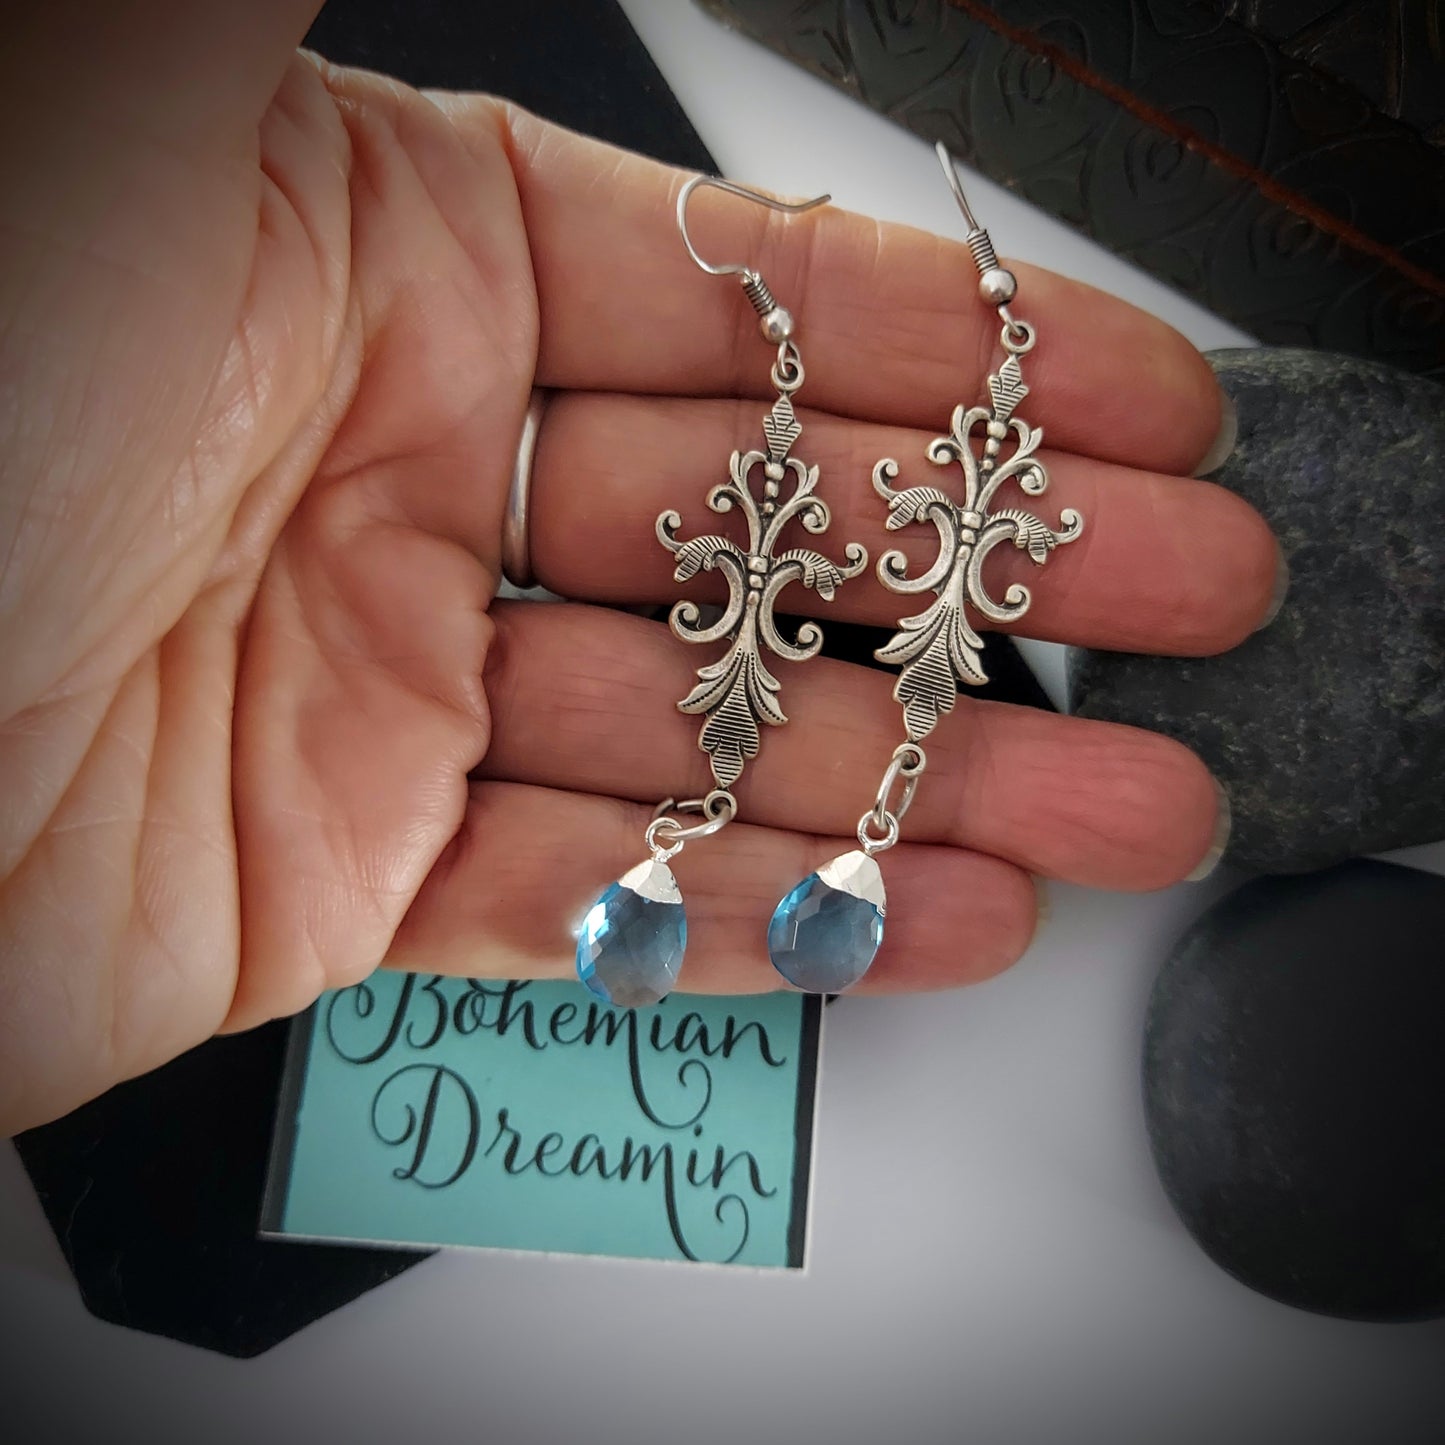 Created in our studio, these unique earrings are lightweight and so beautiful to wear! The stunning Blue Topaz dangles from an Art Nouveau Style Filigree base. Really lovely on!
 
Comes in a Black Velvet drawstring bag for safe keeping, or gifting.

 2.5" length with hooks

Genuine Labradorite and Amazonite, Brass